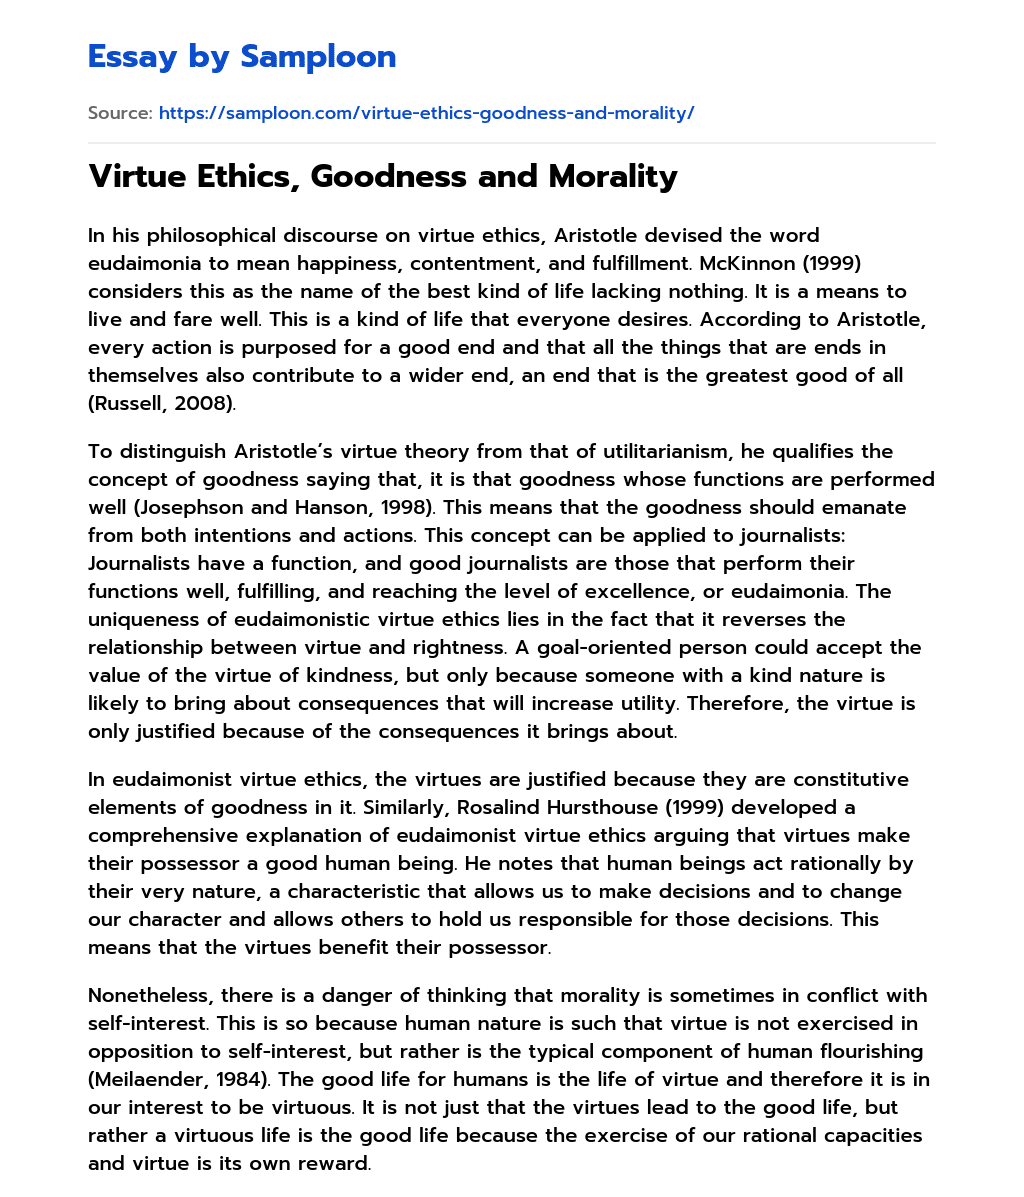 Virtue Ethics, Goodness and Morality essay